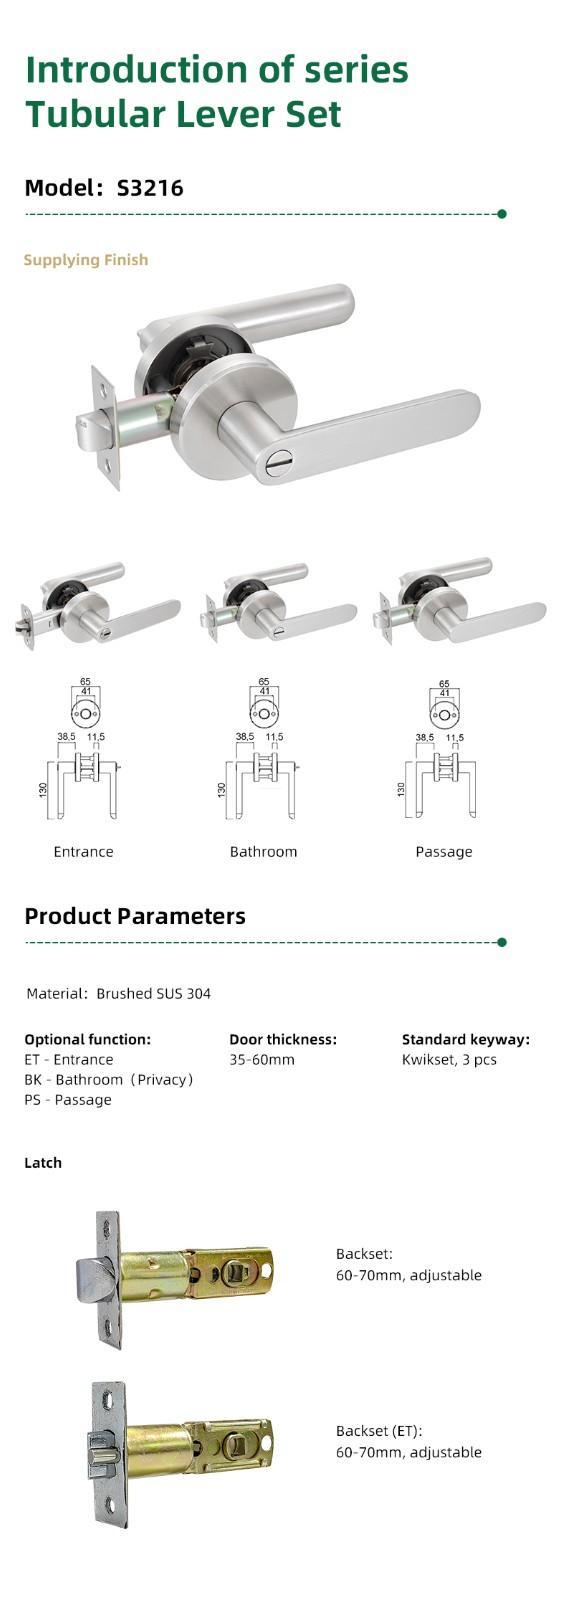 FUYU lock main door lock types for business for home